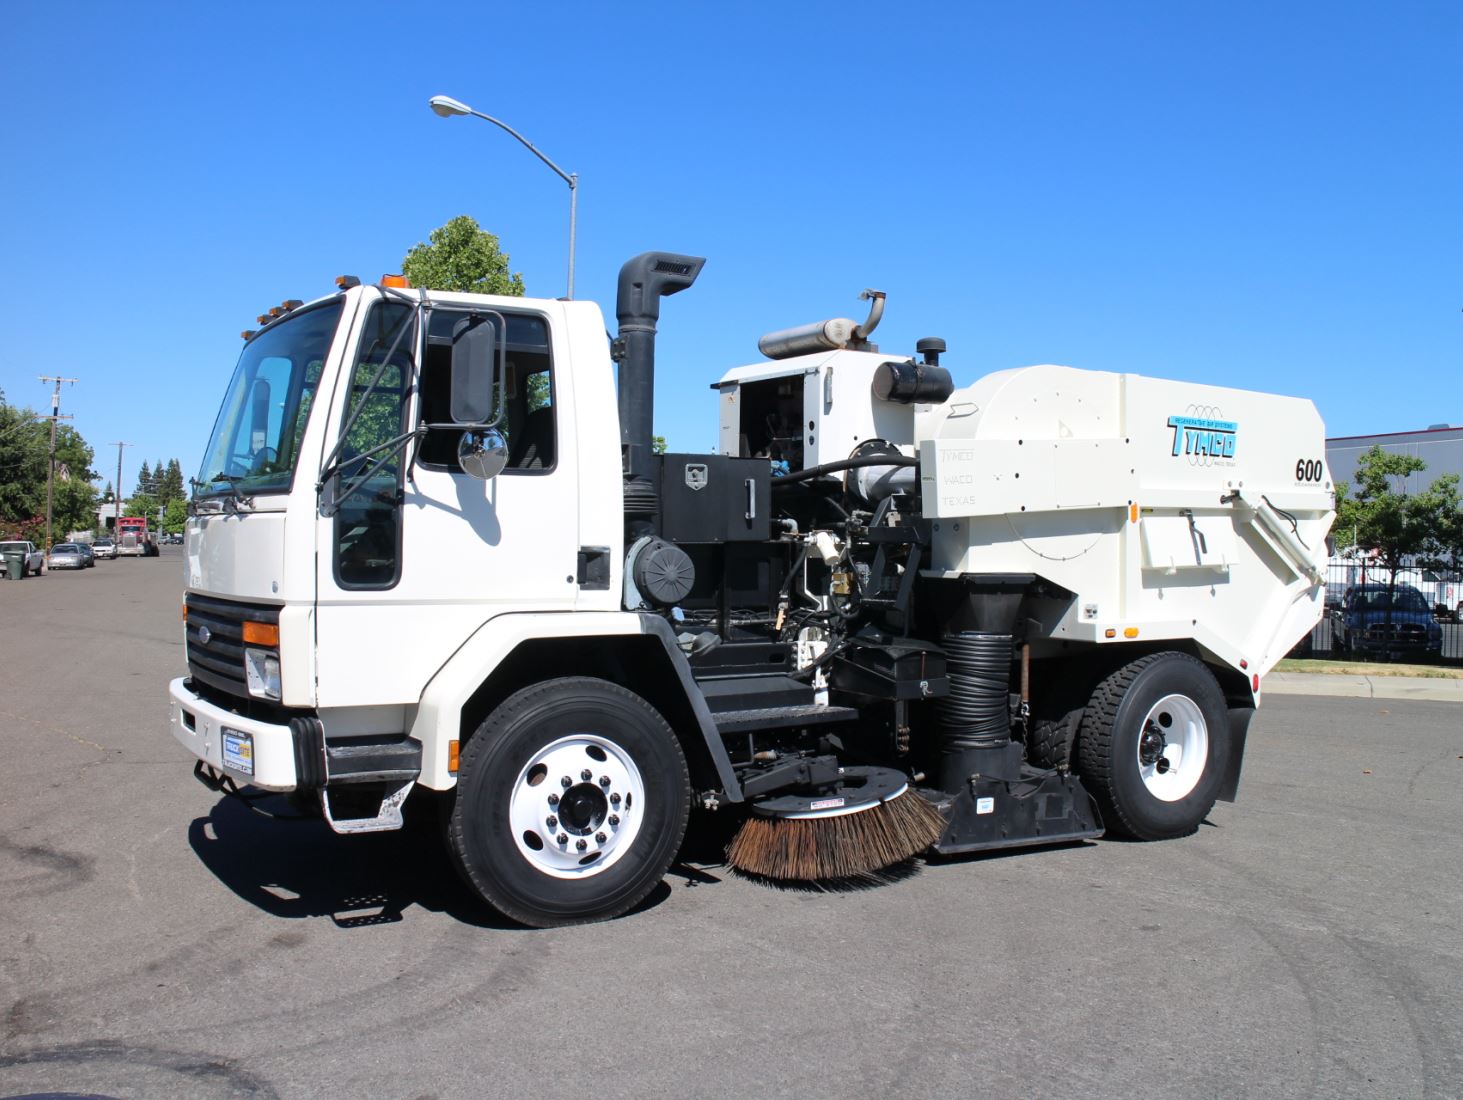 1997 Ford Tymco 600 Regenerative Air Street Sweeper for Sale